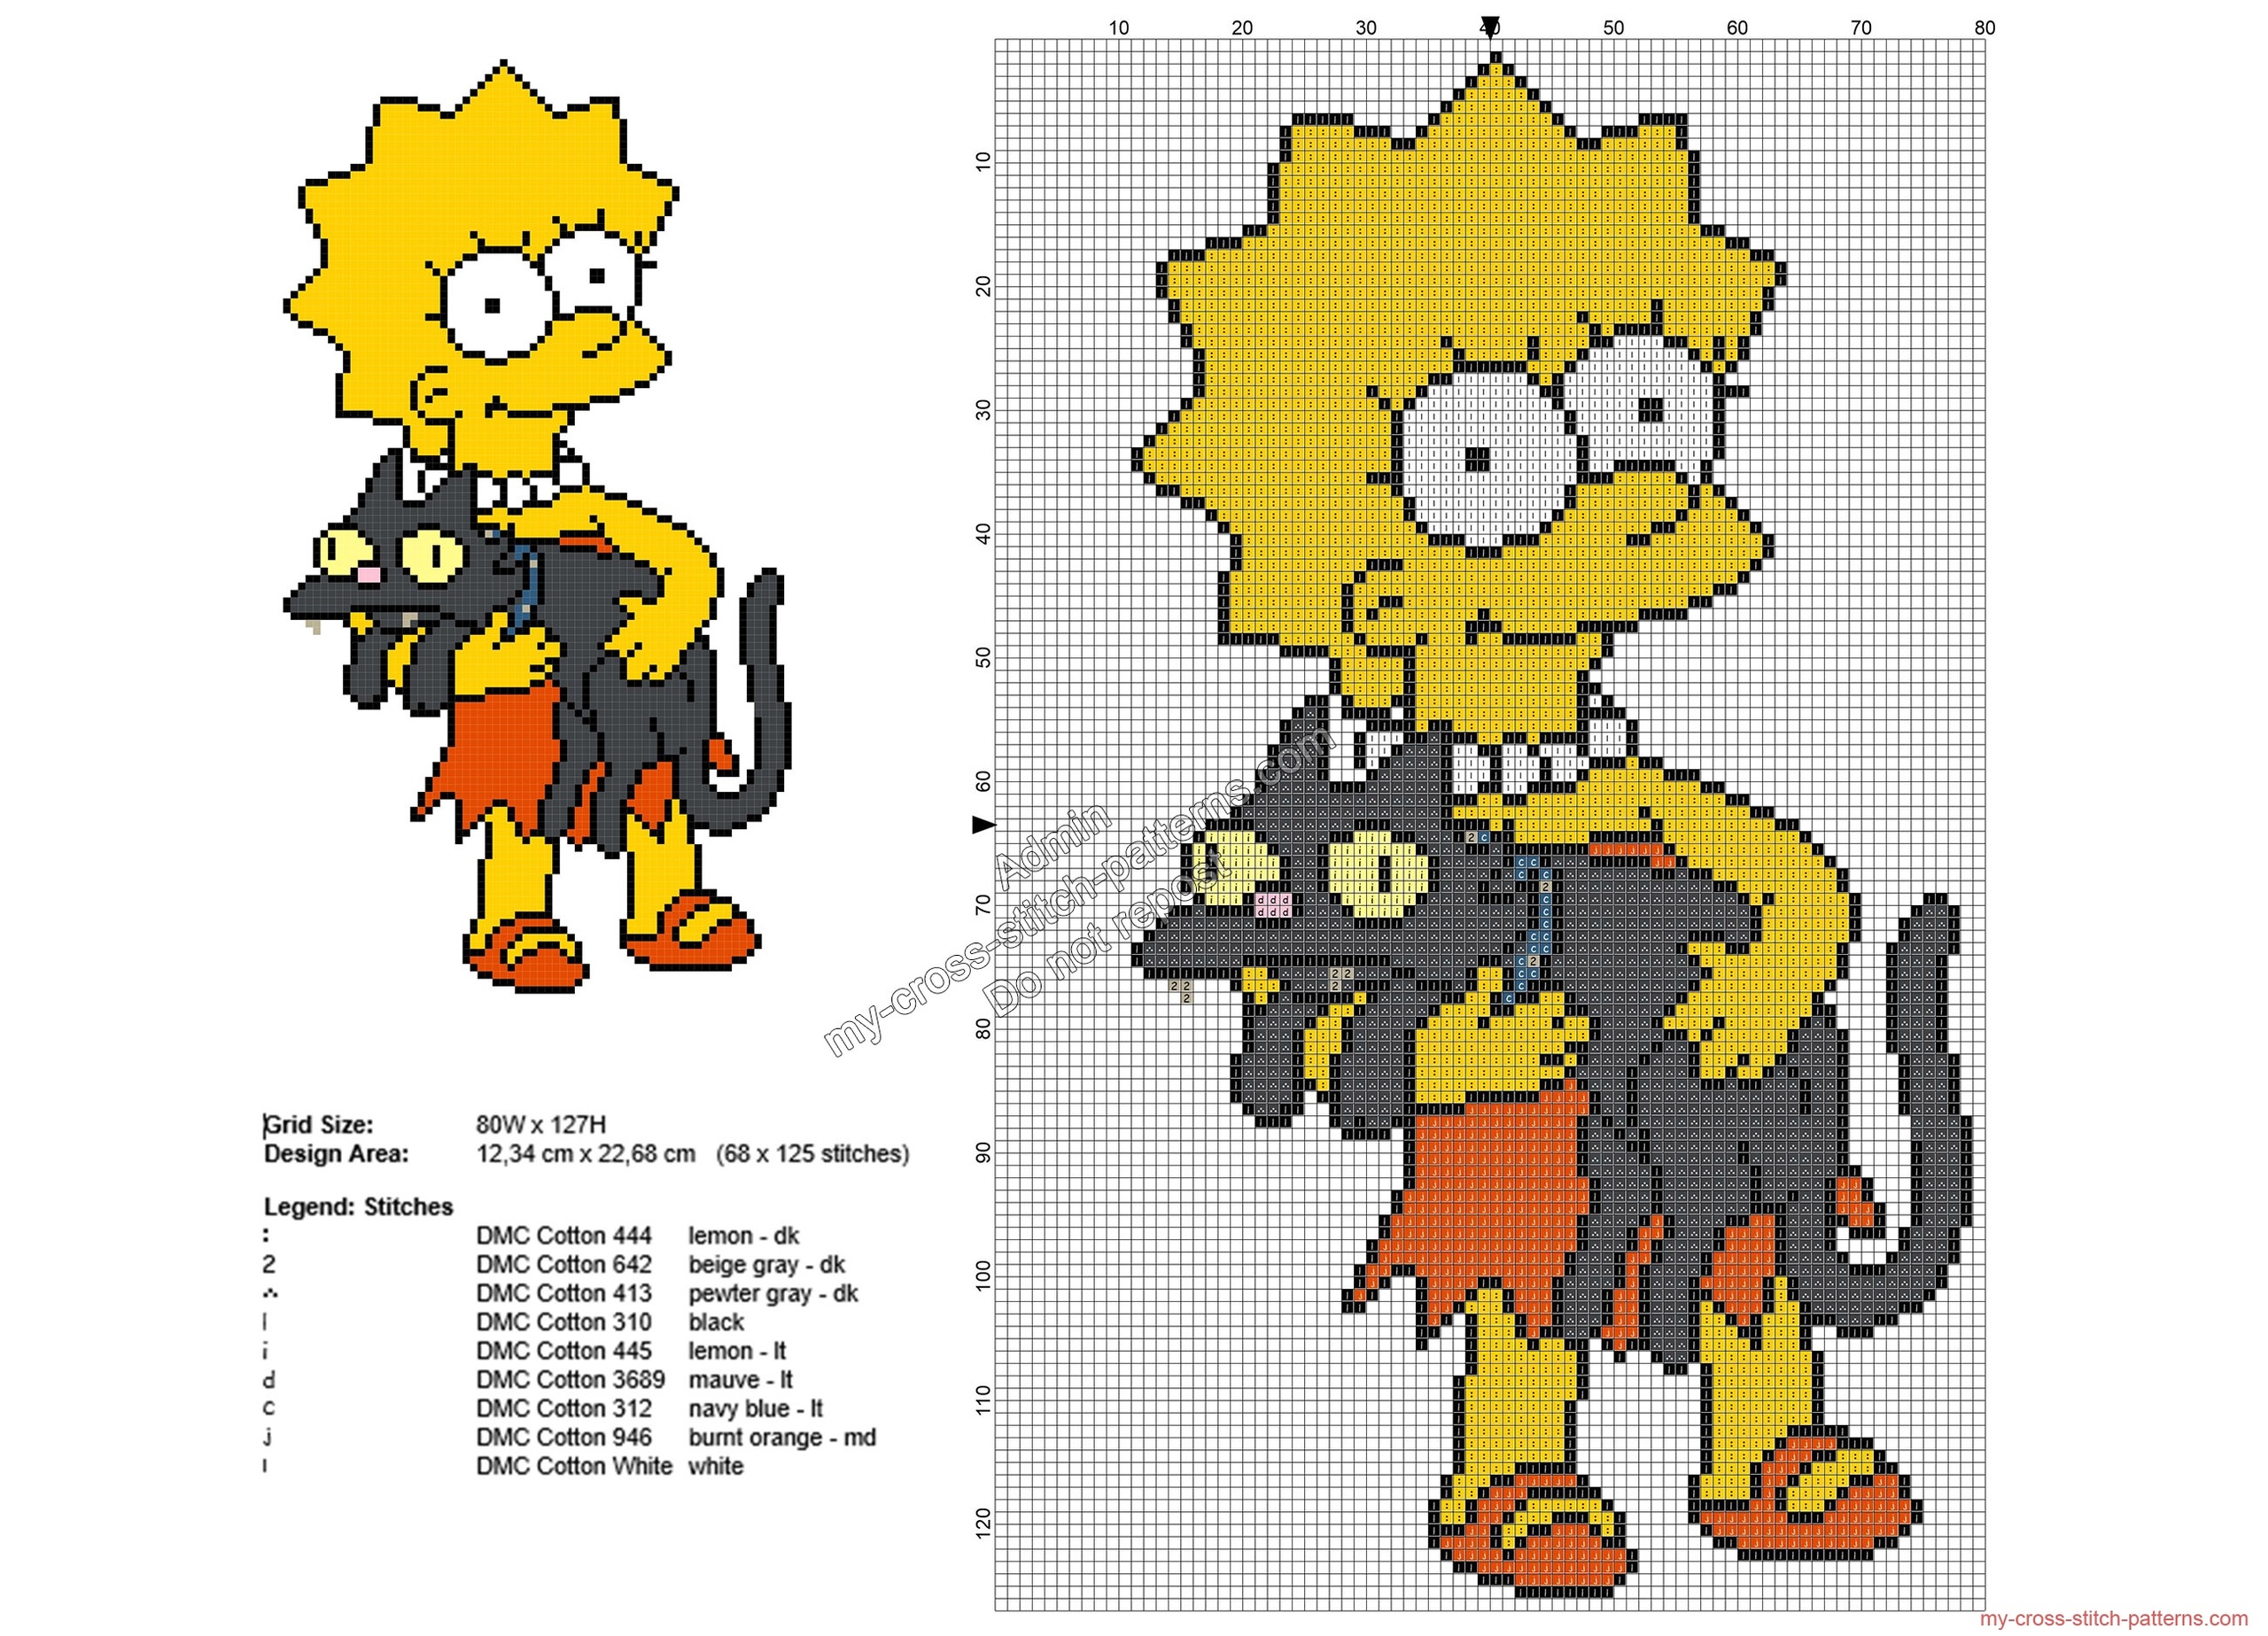 lisa_with_cat_free_the_simpsons_cross_stitch_pattern_68x125